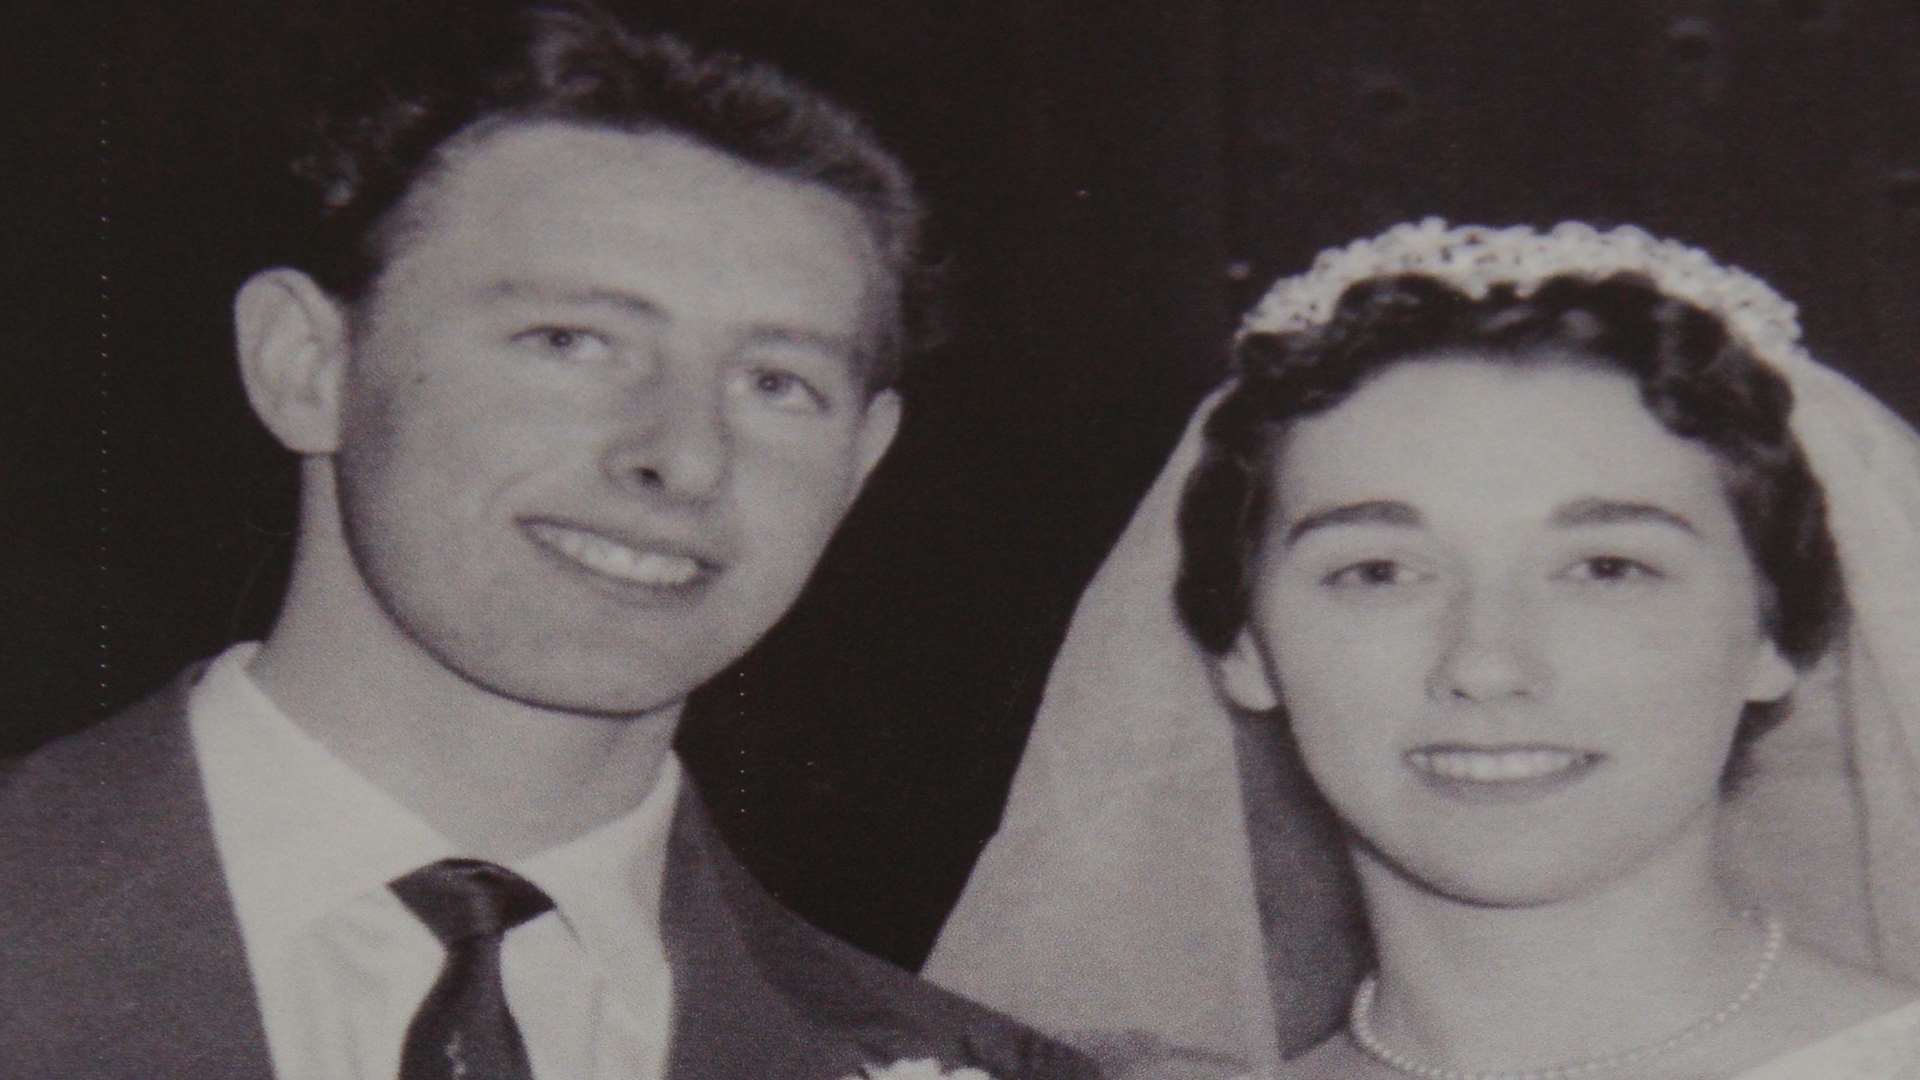 Don and Brenda on their wedding day